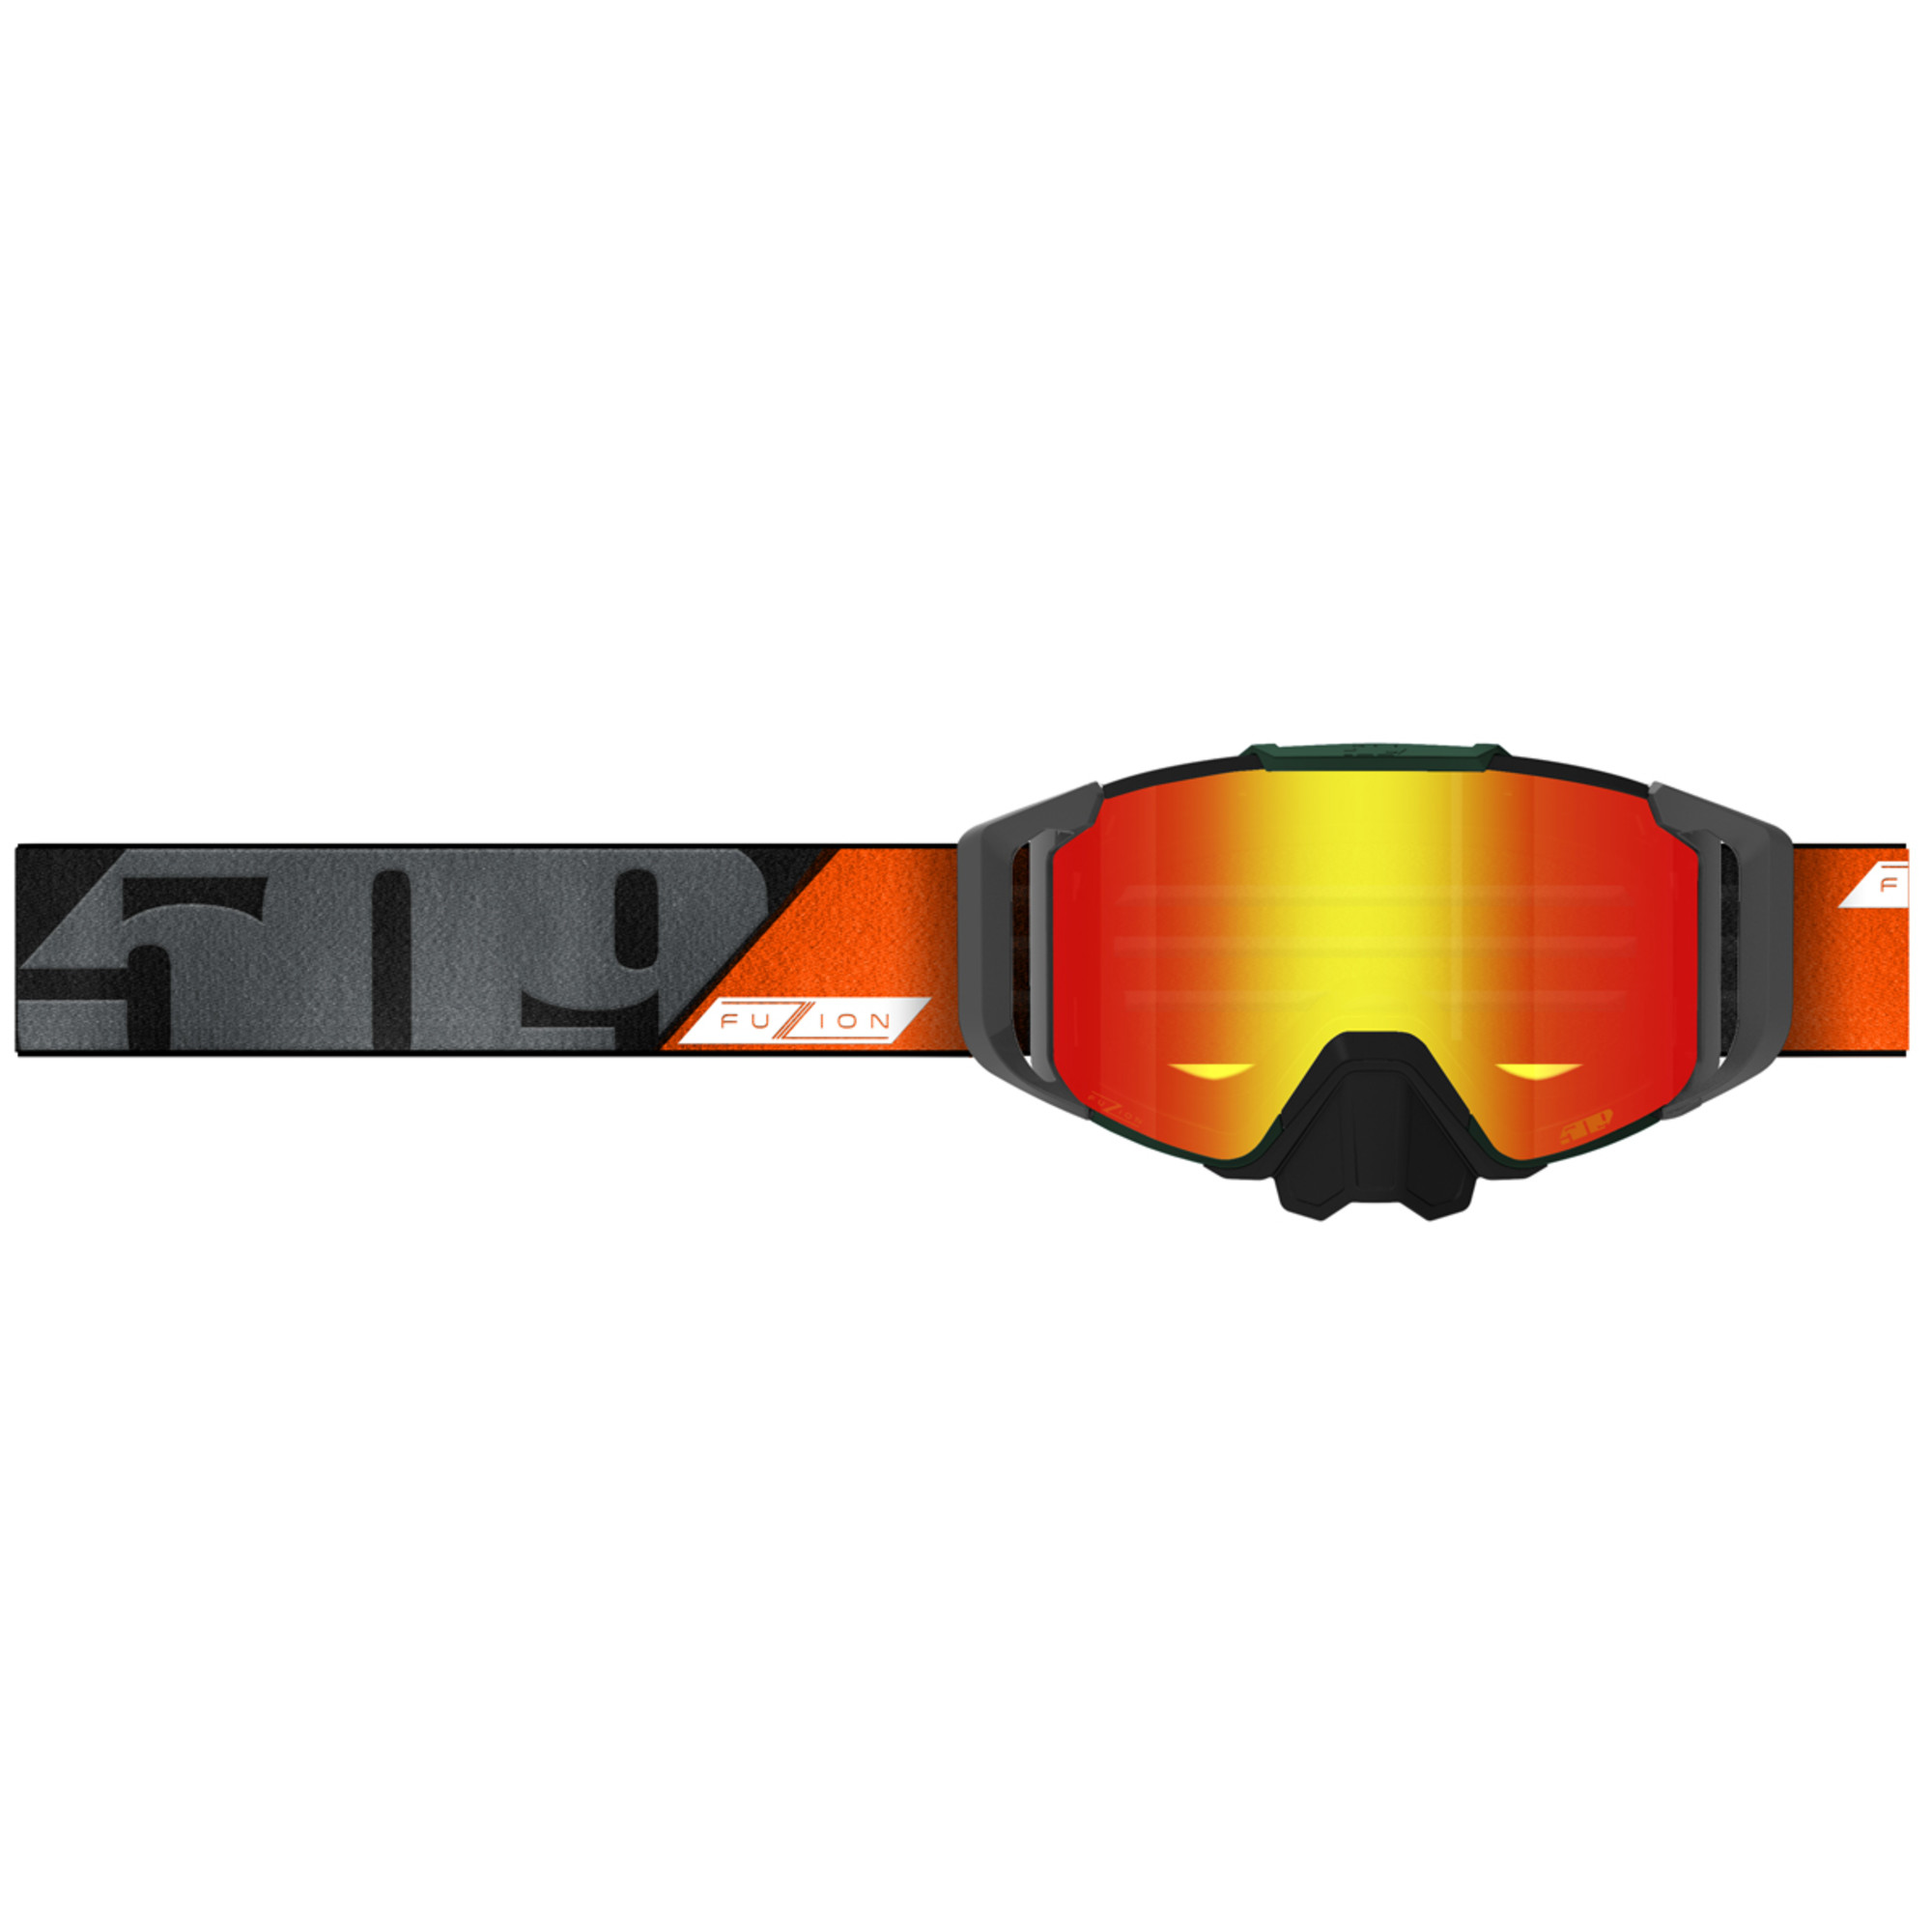 509 goggles lens adult sinister fuzion x6